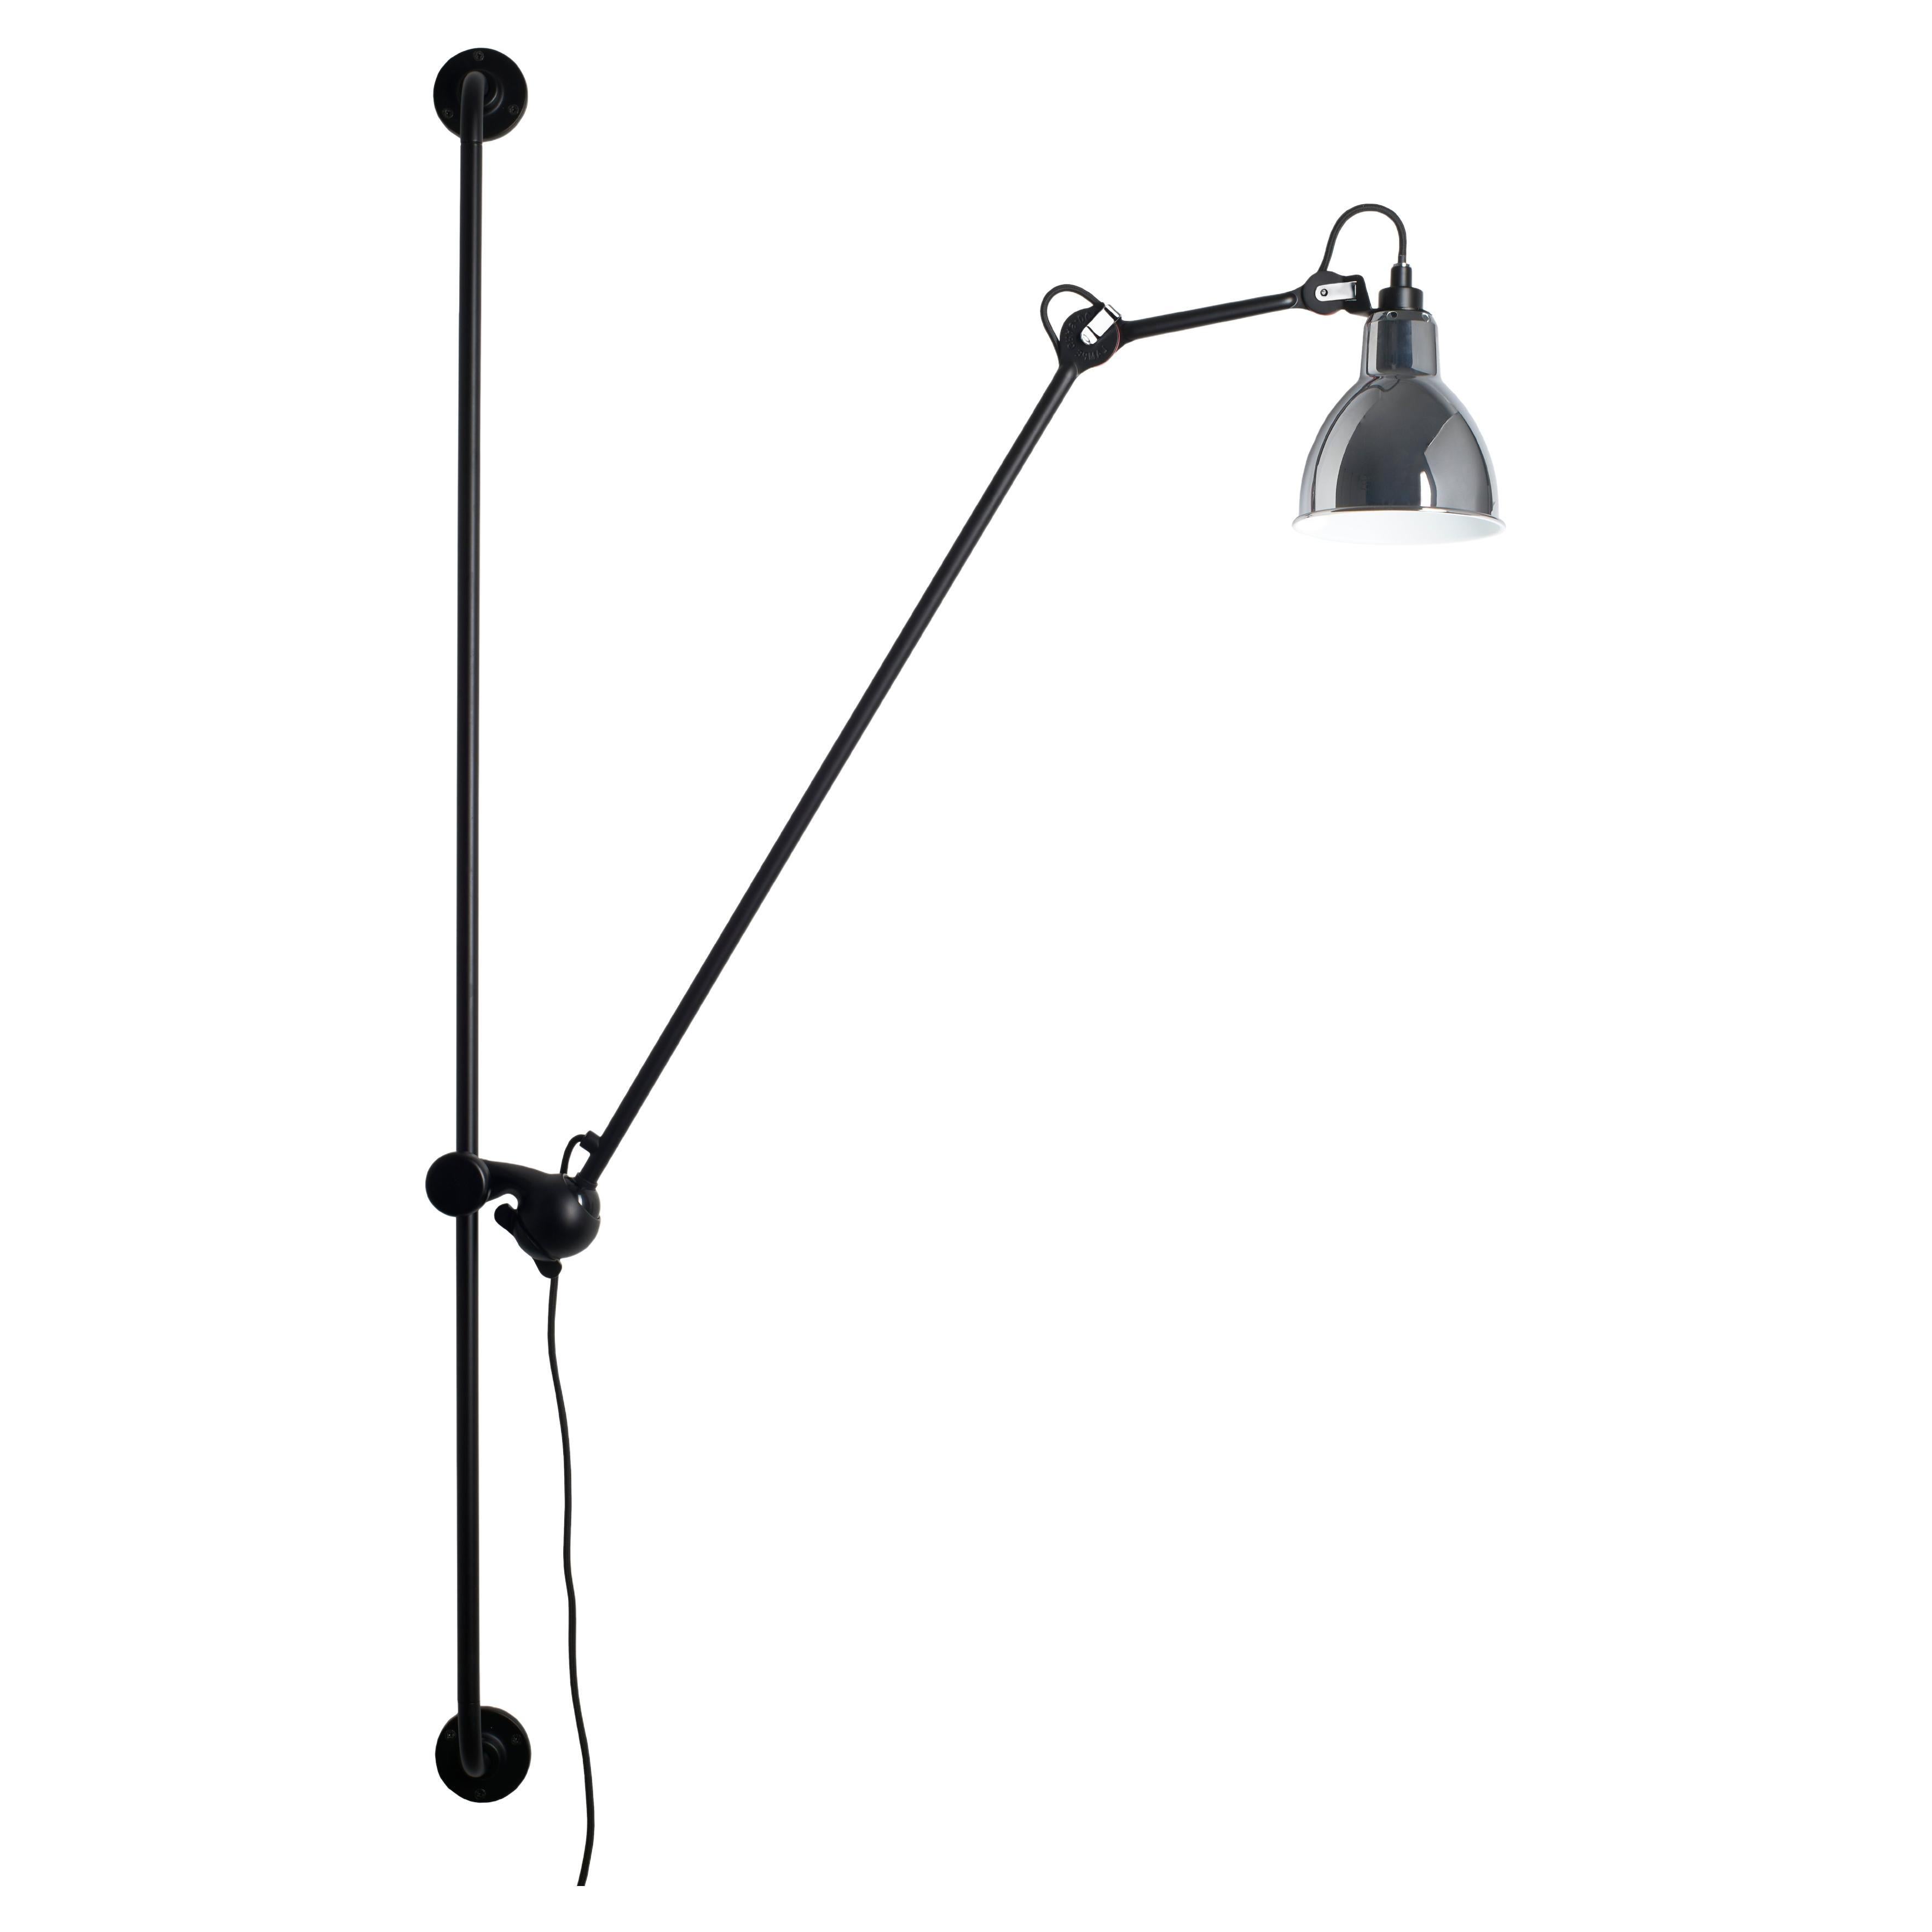 DCW Editions La Lampe Gras N°214 Round Wall Lamp in Black Arm and Chrome Shade For Sale